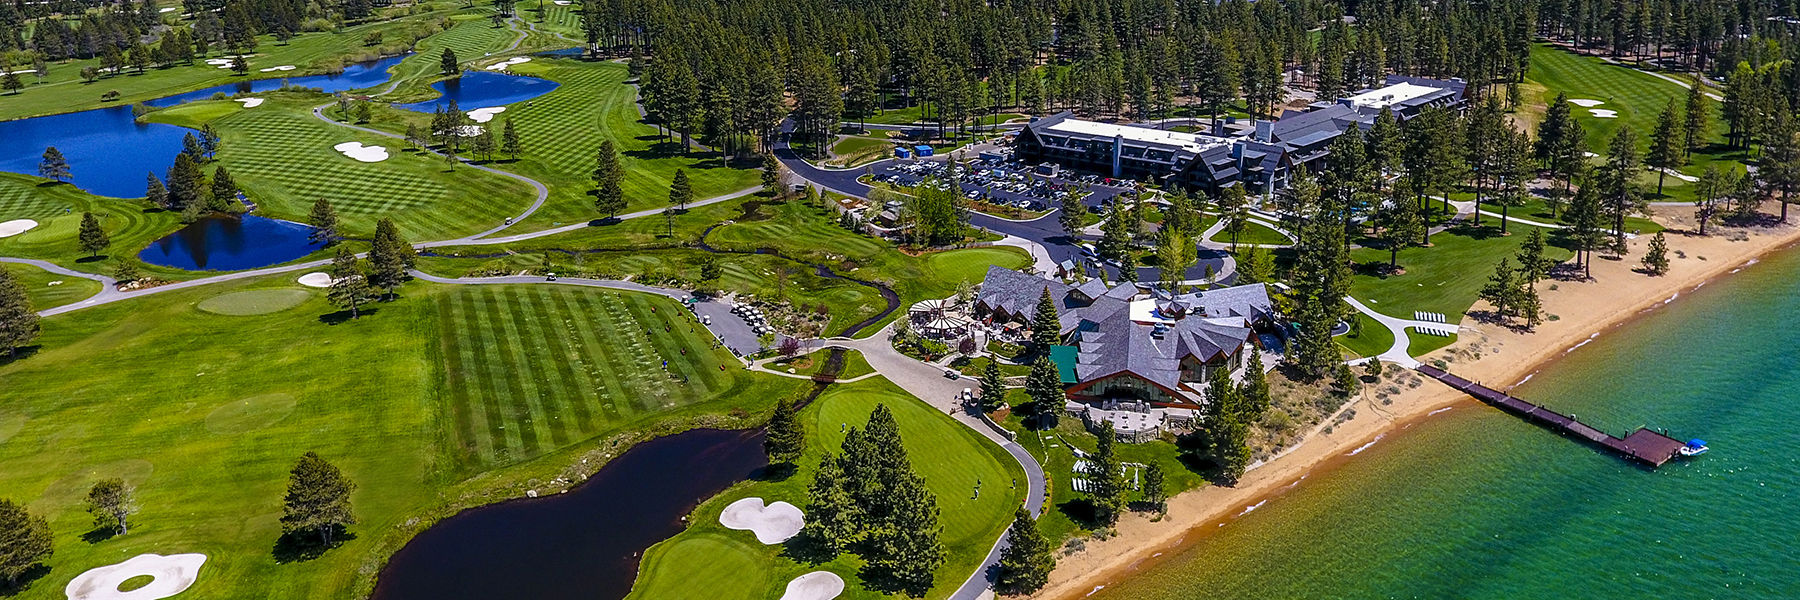 Aerial shot of a resort and golf course